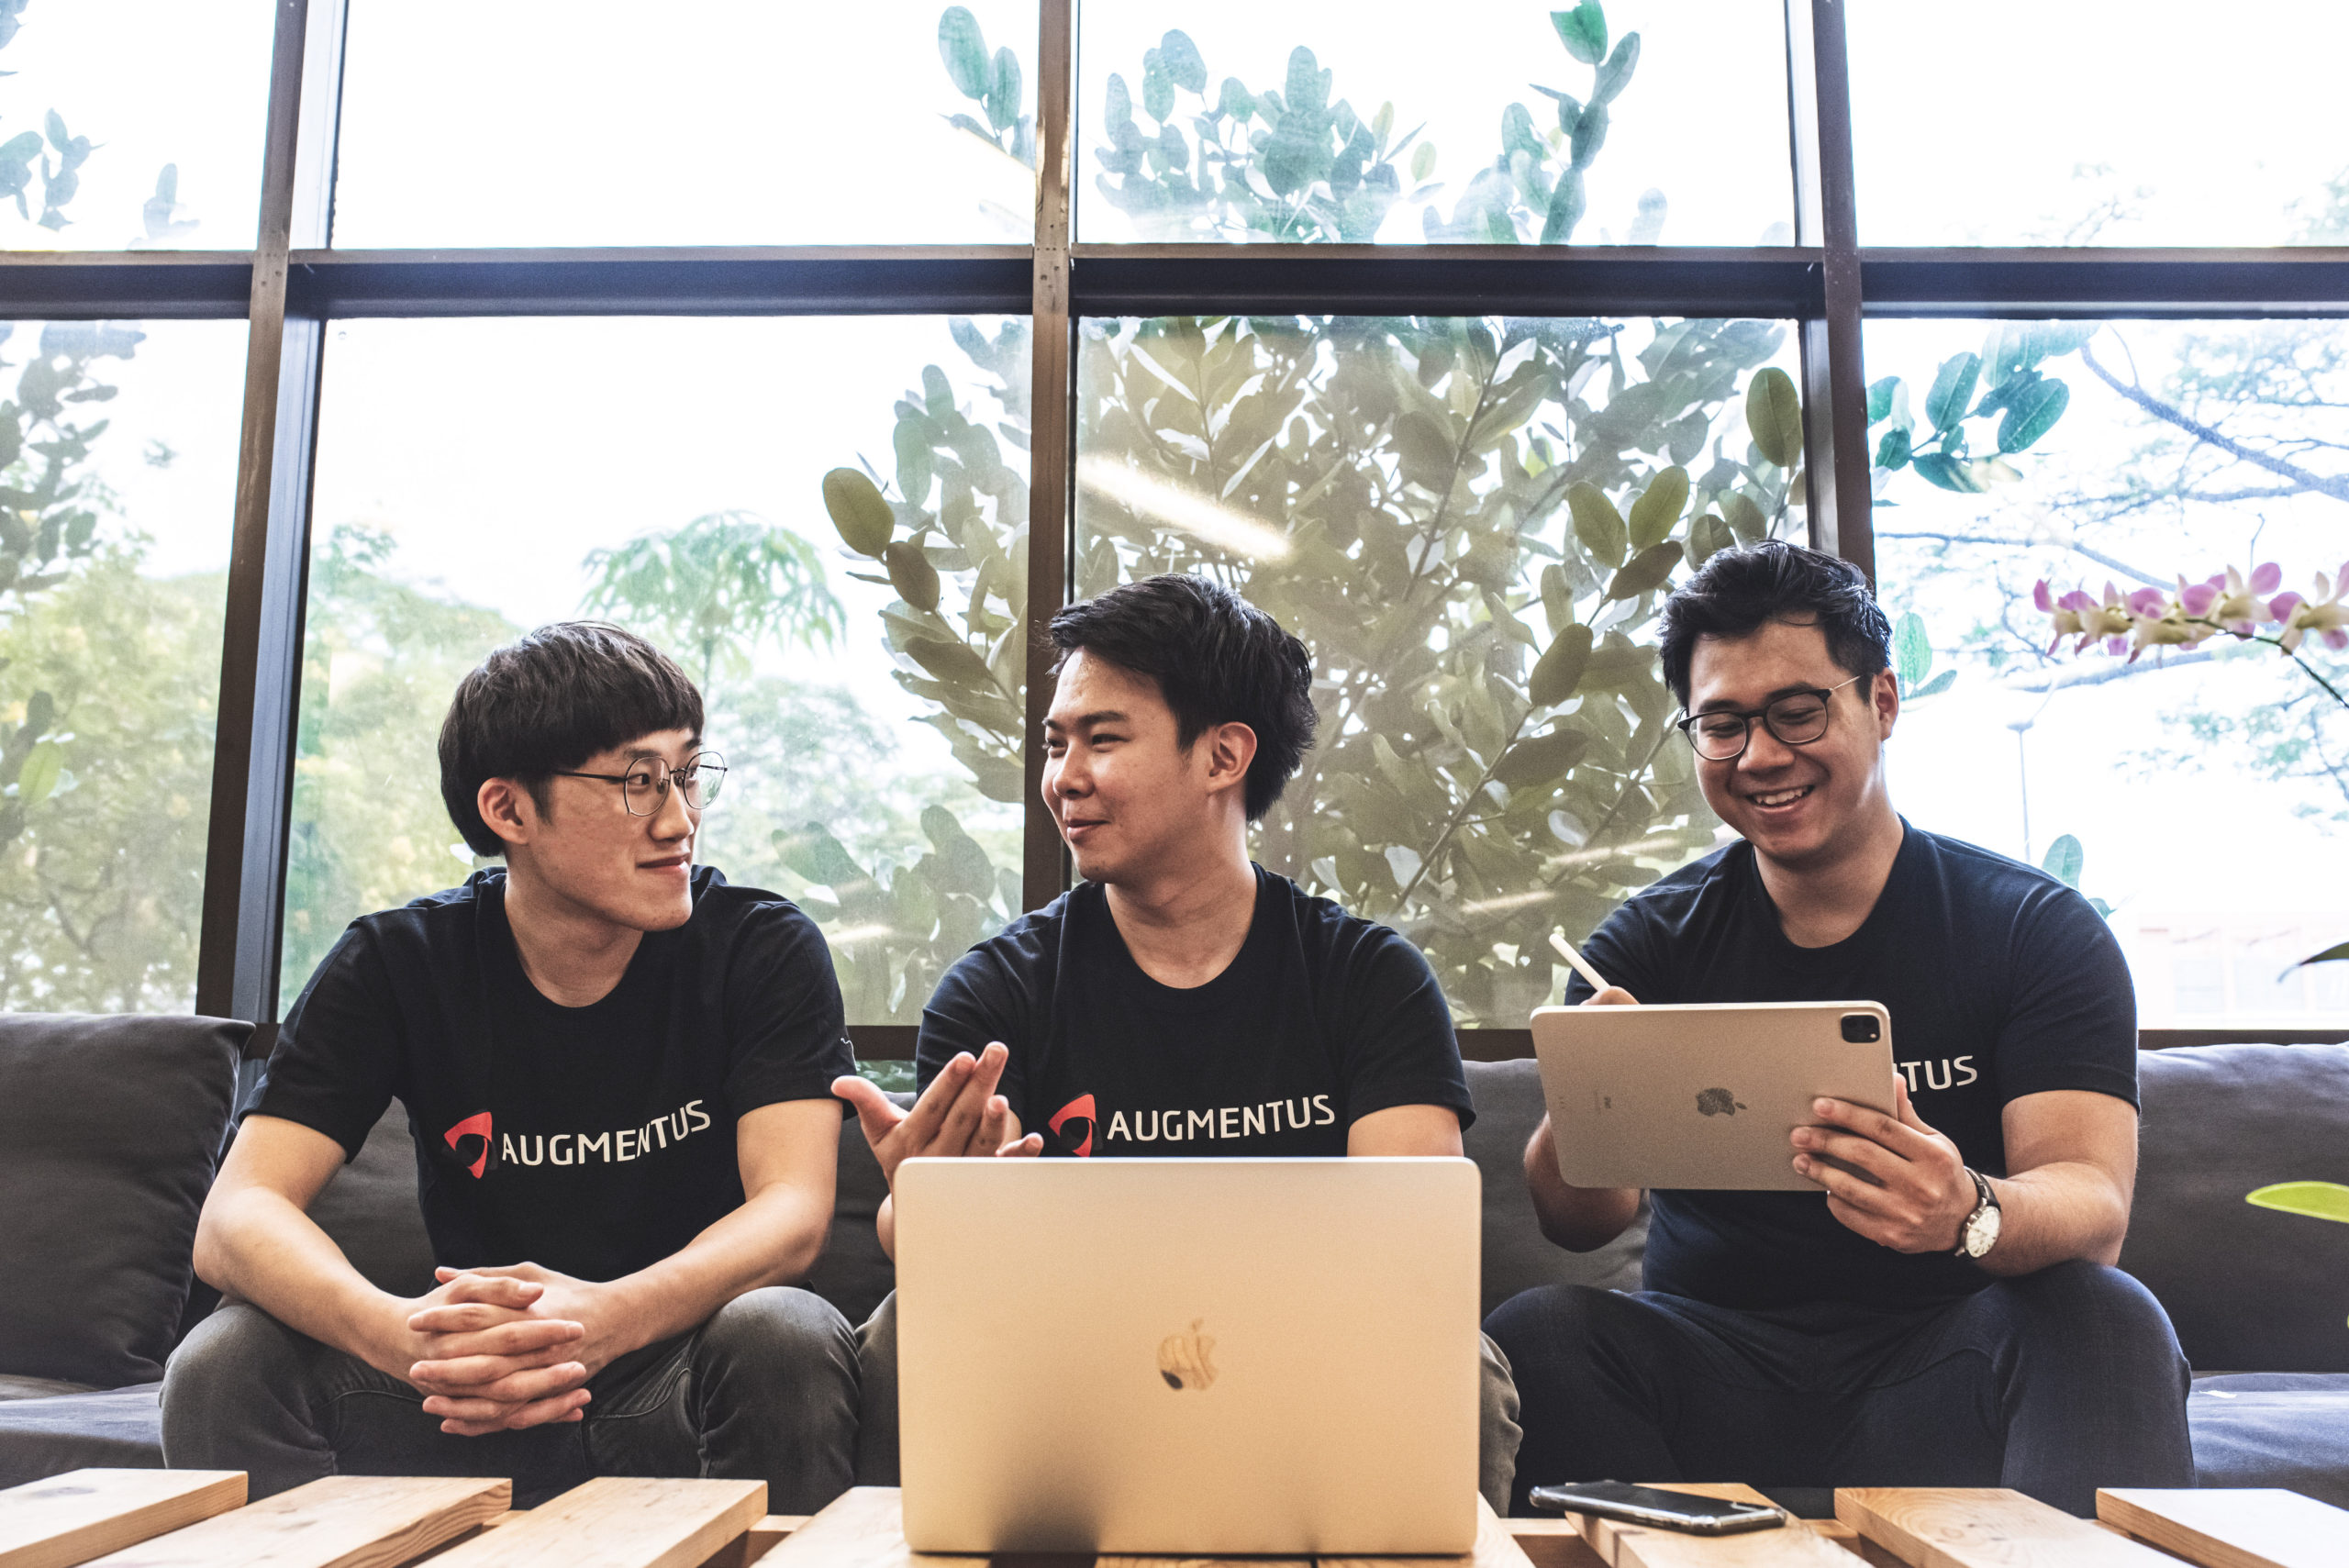 From left to right, Chong Voon Foo, Leong Yong Shin, and Daryl Lim, co-founders of Augmentus. Photo courtesy of Augmentus.